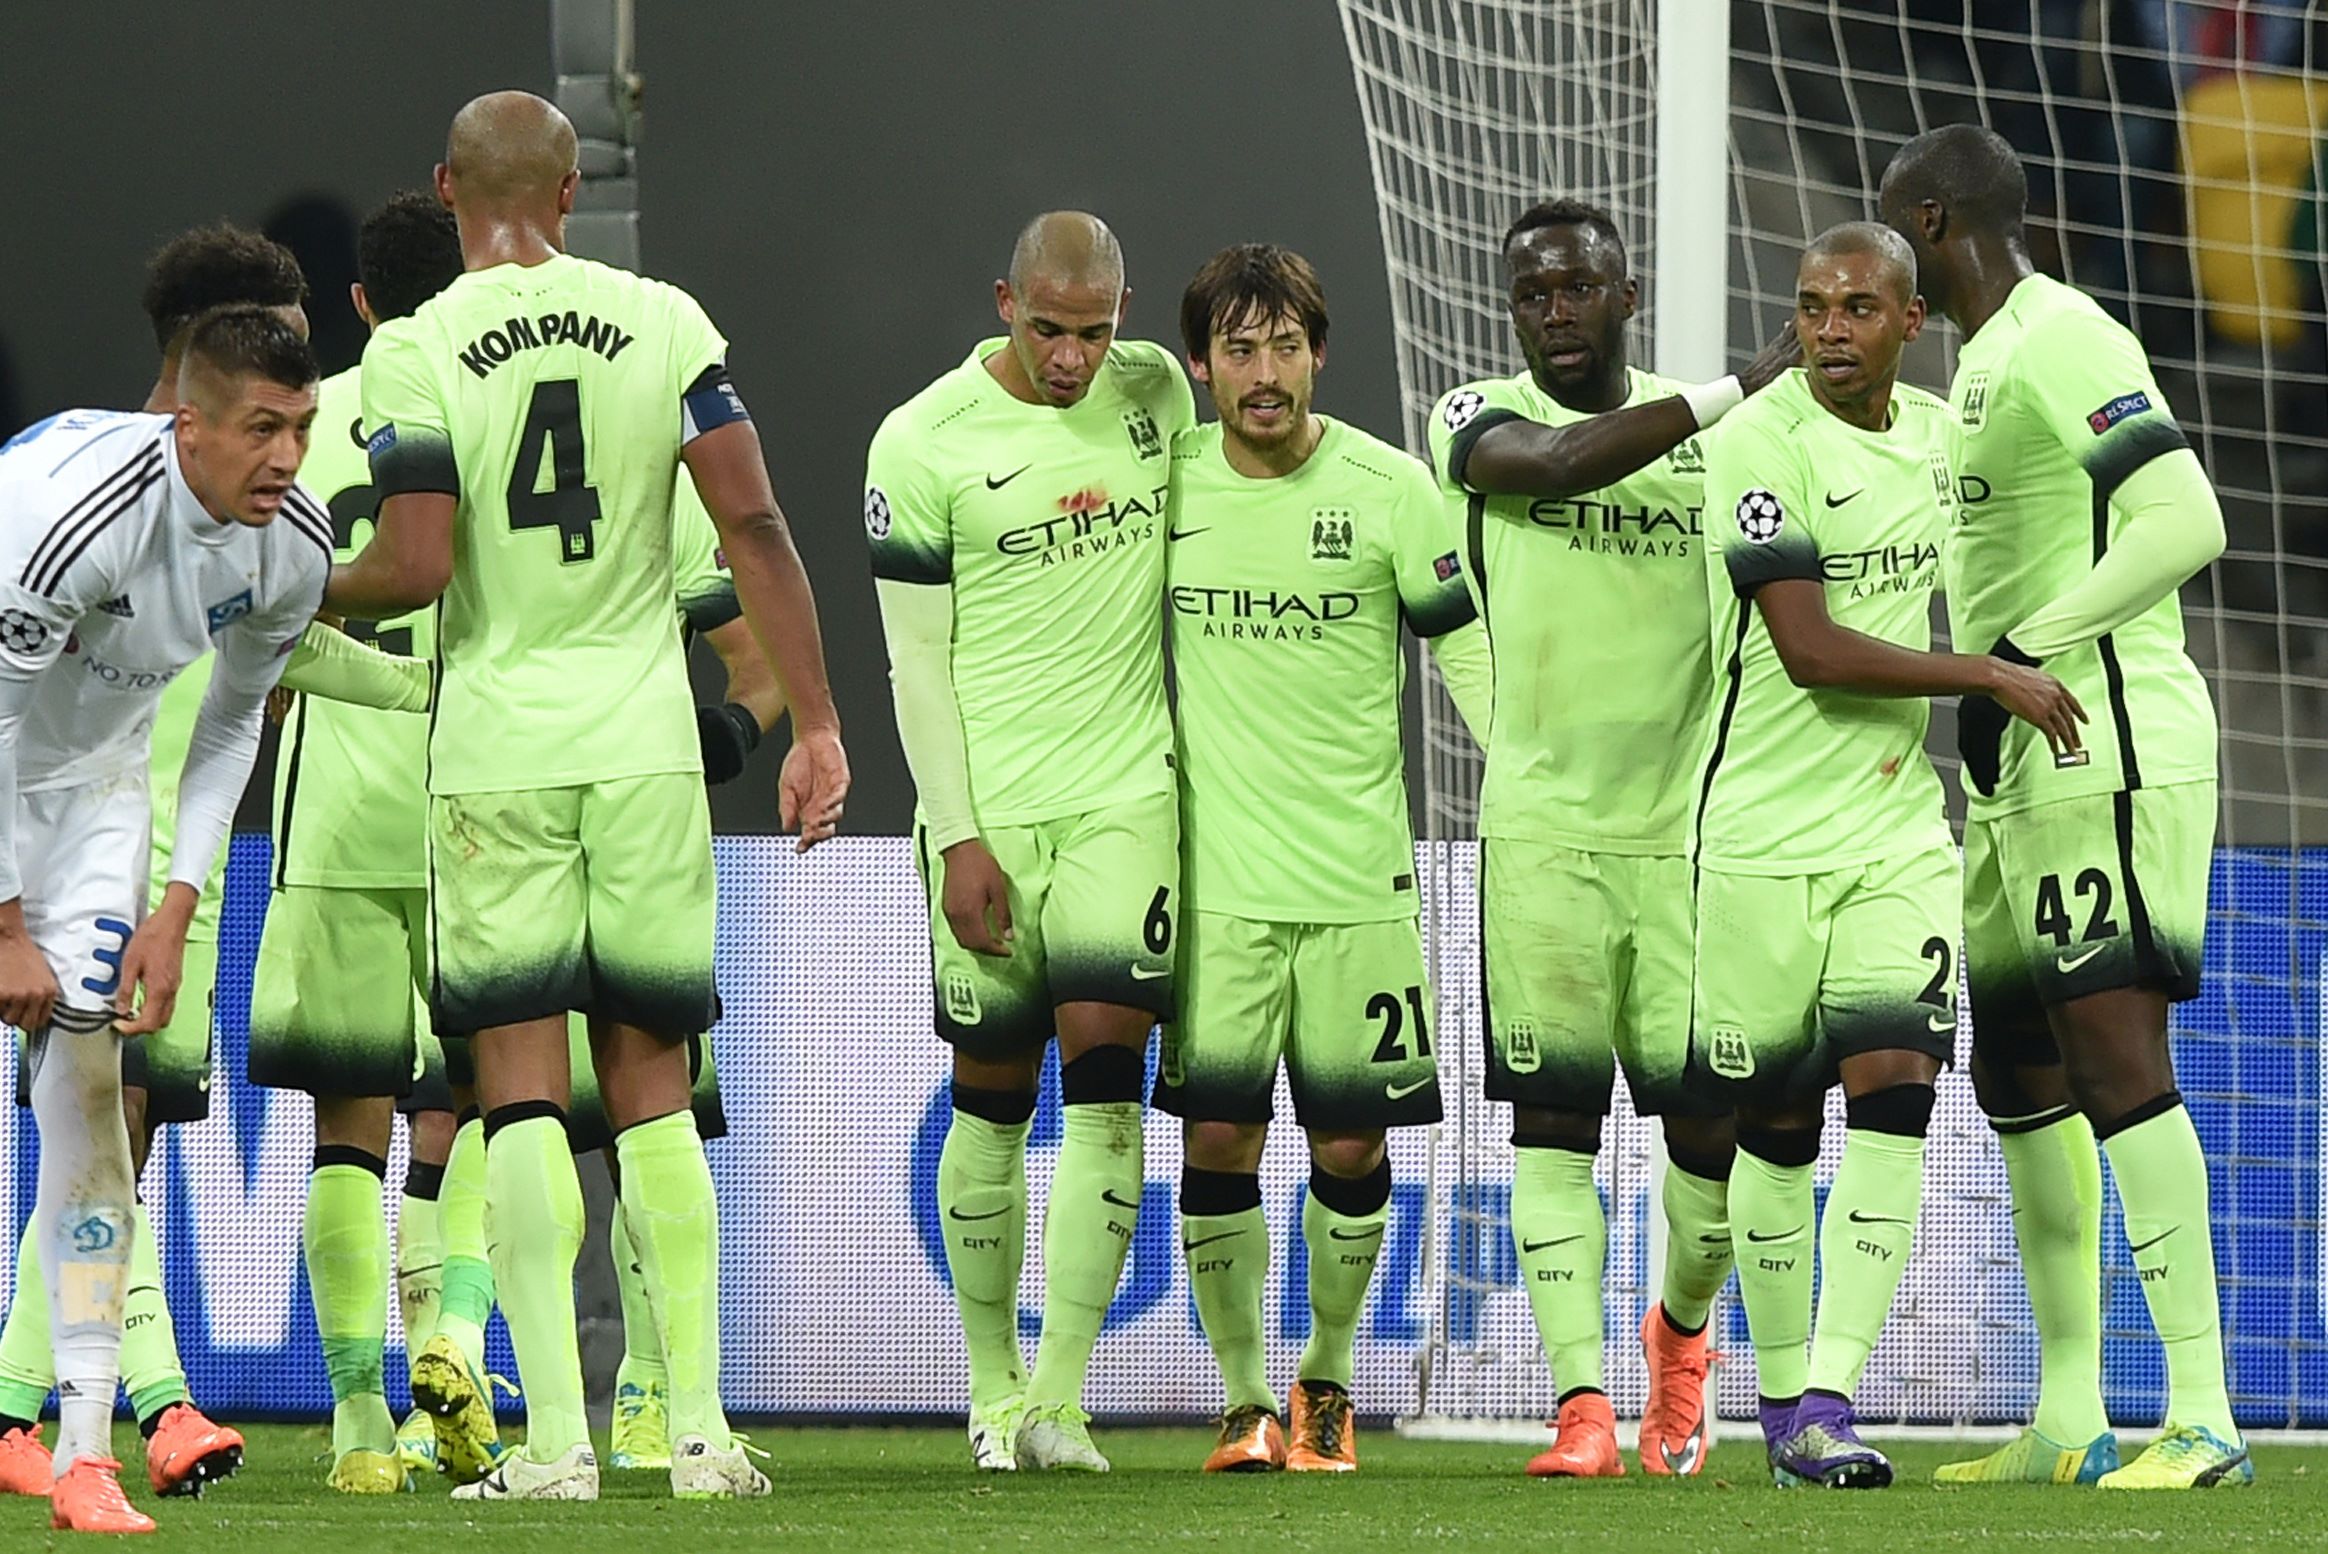 Manchester City players celebrate after Spanish midfielder David Silva scores against Dynamo Kiev. Citizens captain Vincent Kompany was pleased with his team’s performance. Photo: AFP